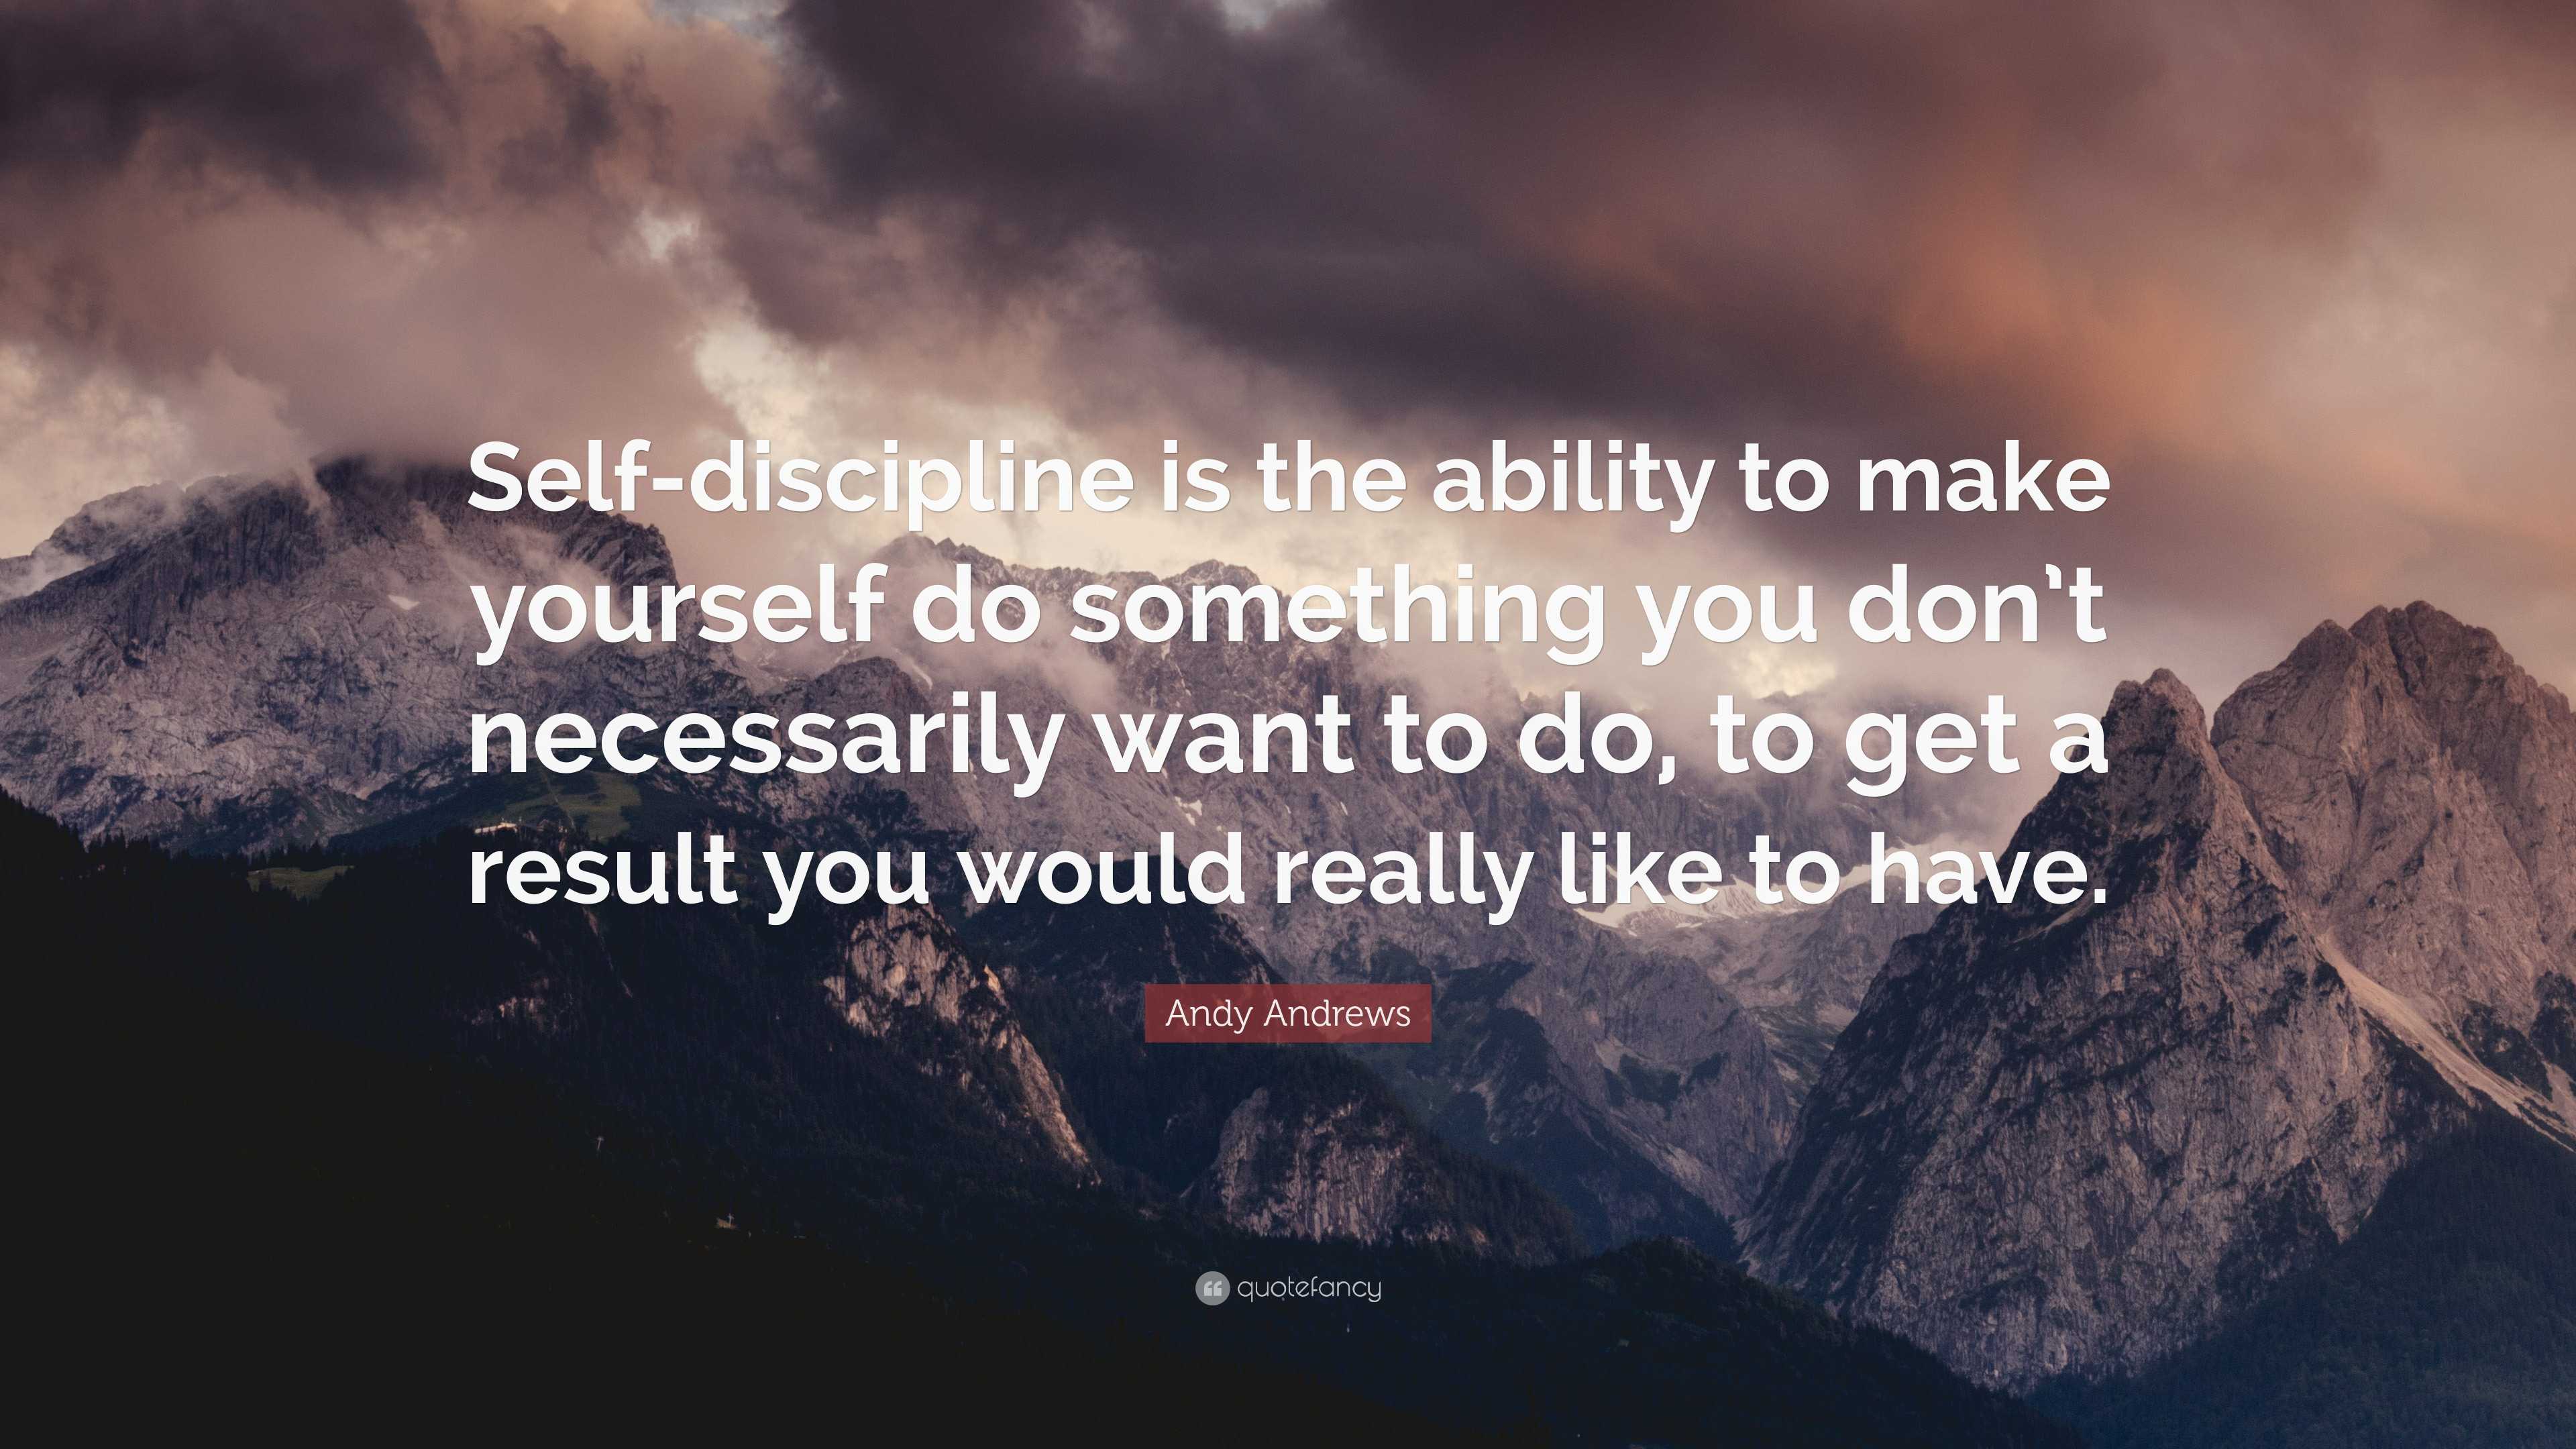 Andy Andrews Quote: “Self-discipline is the ability to make yourself do ...